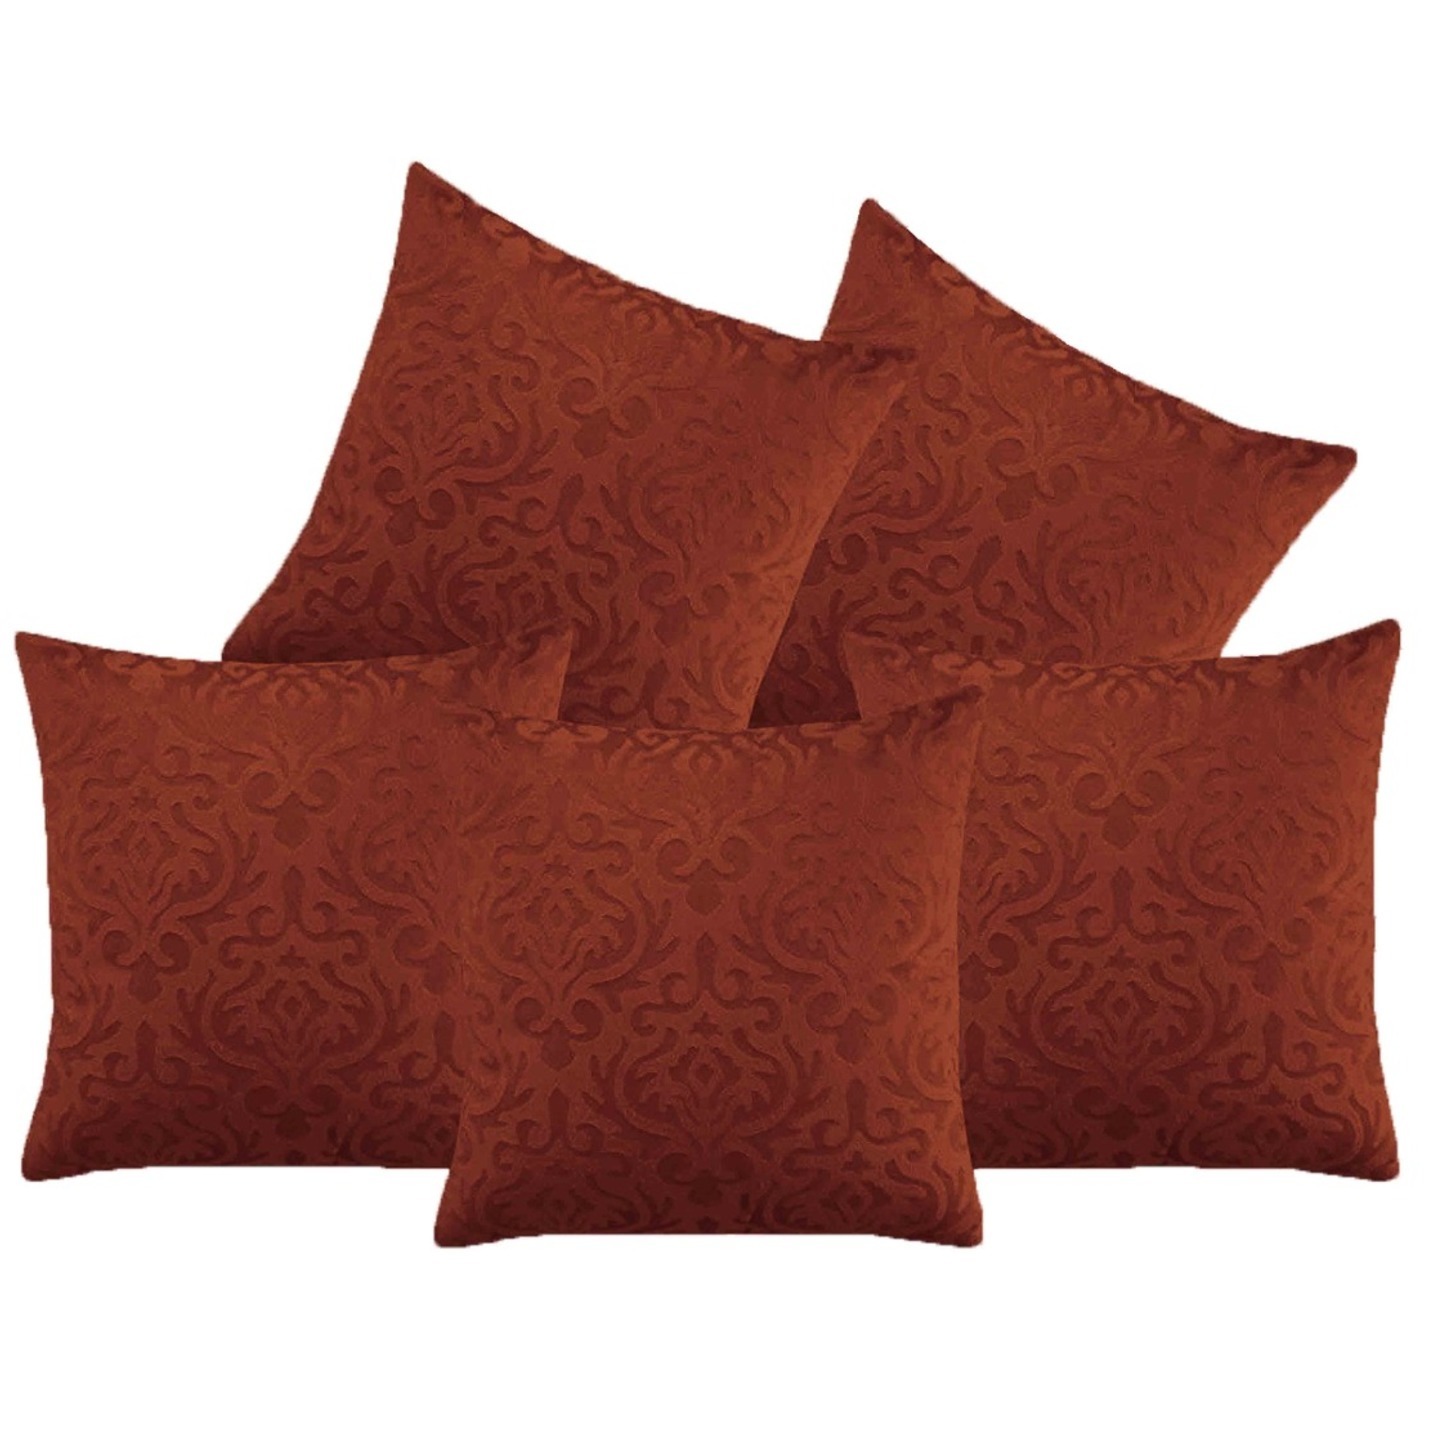 Handtex Home Velvet Cushion Covers 40.64x40.64 cm16x16 inches, - Set of 5  G-Brown -Beige